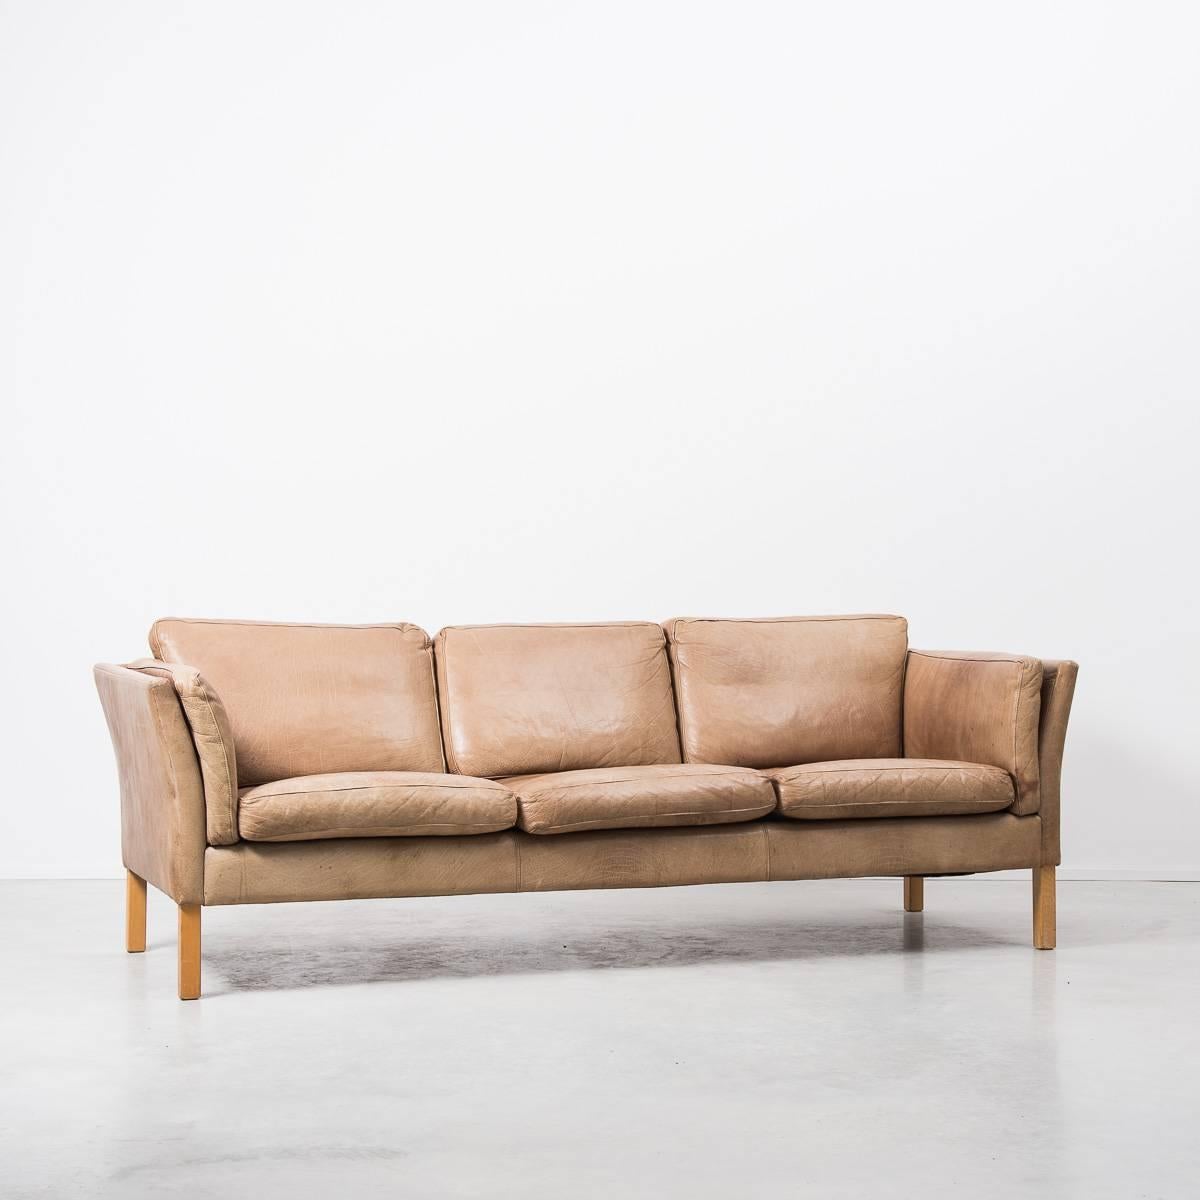 Beautiful quality Erik Jorgensen Danish leather three seater sofa, manufactured in the 1950s Denmark. Faded to a light buttery tan colour, the sofa is in good vintage condition with a desirable amount of patina and age to the leather. It has the